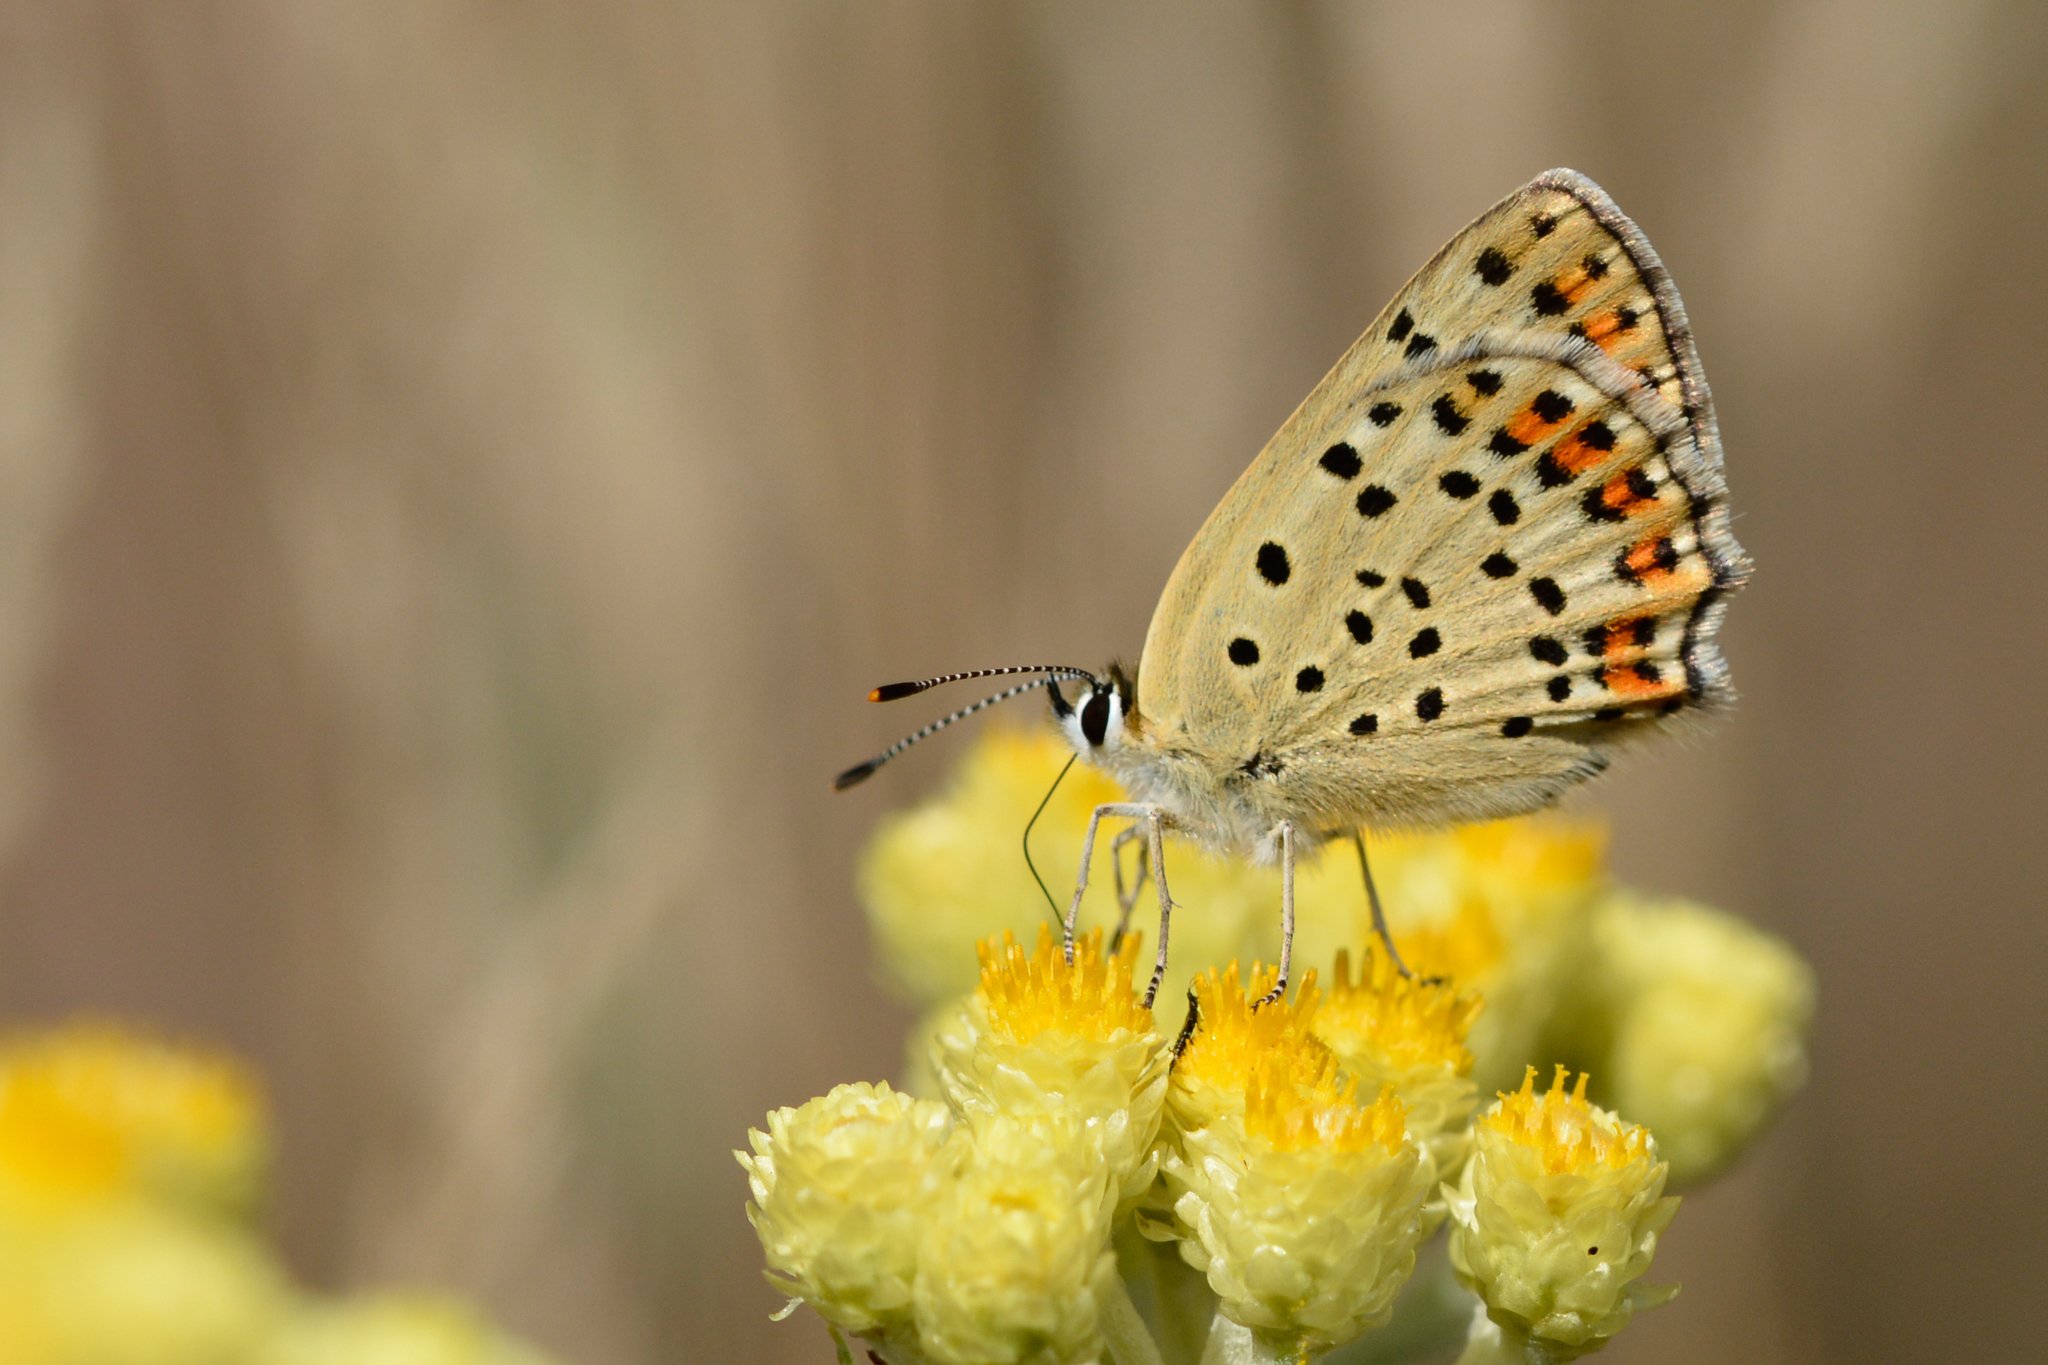 Nitrogen enrichment in host plants increases the mortality of common Lepidoptera species